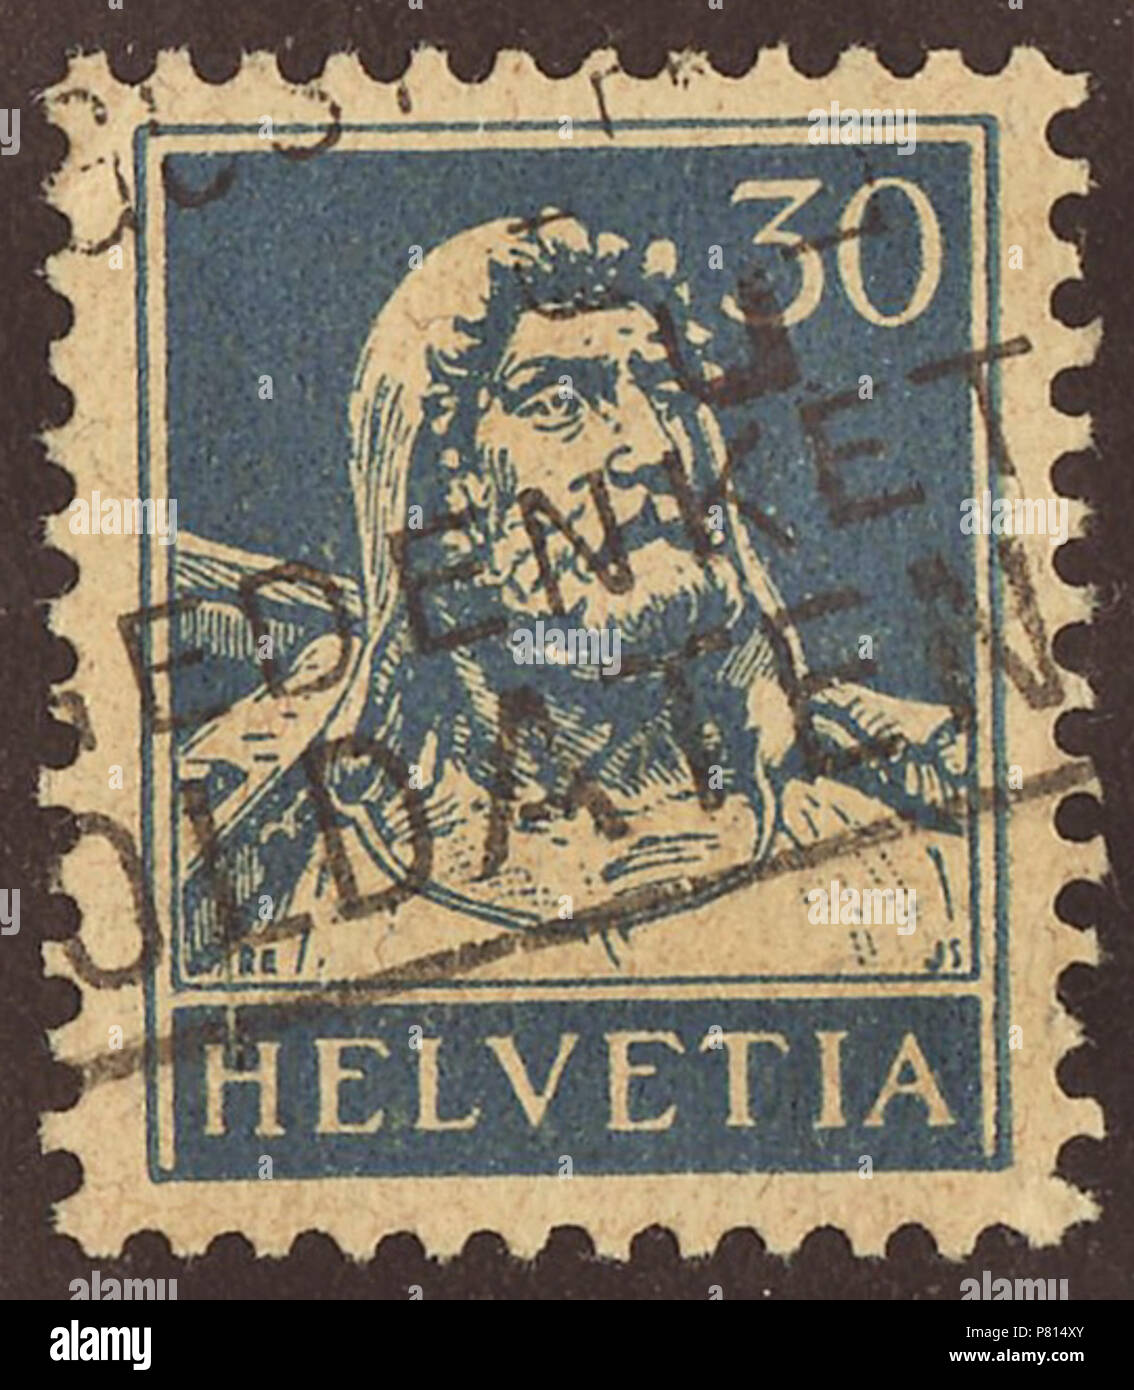 Stamp of Switzerland; 1932; definitive stamp of the issue 'Wilhelm Tell - new values'; drawing with the portrait of Wilhelm Tell after a statue of the artist Richard Kissling in Altdorf (Switzerland); stamp postmarked Stamp: Michel: No. 169z Color: blue on light chrome yellow granite paper (fibrilled with silver fibres) Watermark: Switzerland No. 2 (multiple Swiss crosses) Nominal value: 30 (Rappen, Centimes) Postage validity: from 1932 until 31 December 1942 Stamp picture size (printed area): 17.0 x 21.5 mm . 1932 (first issue of the stamp) 358 SUI 1932 MiNr0169z pm B002 Stock Photo